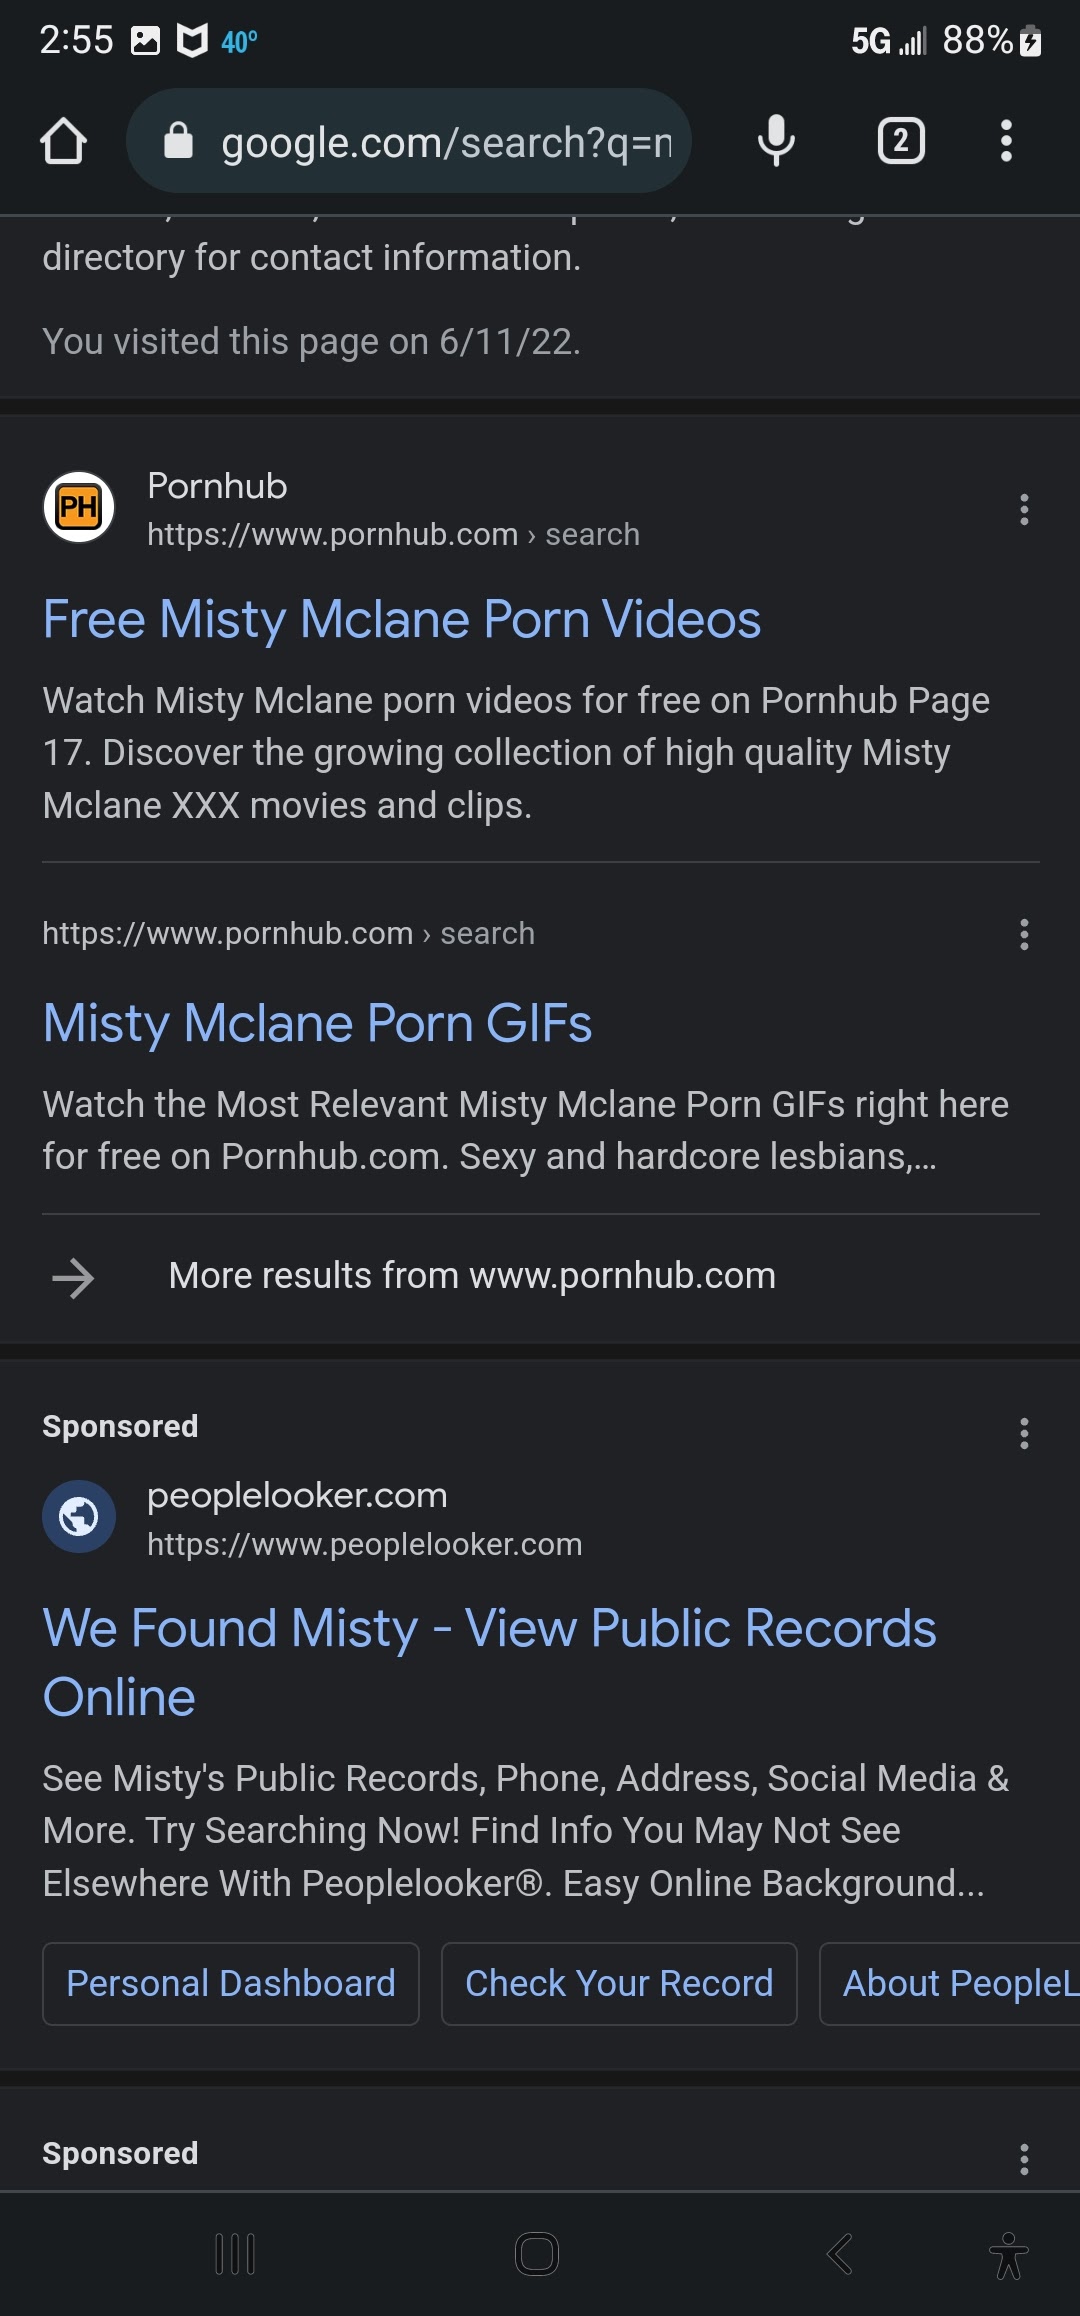 Sexxxxy Video - My name pulls me up on porn sites that I'm not on - Google Search Community